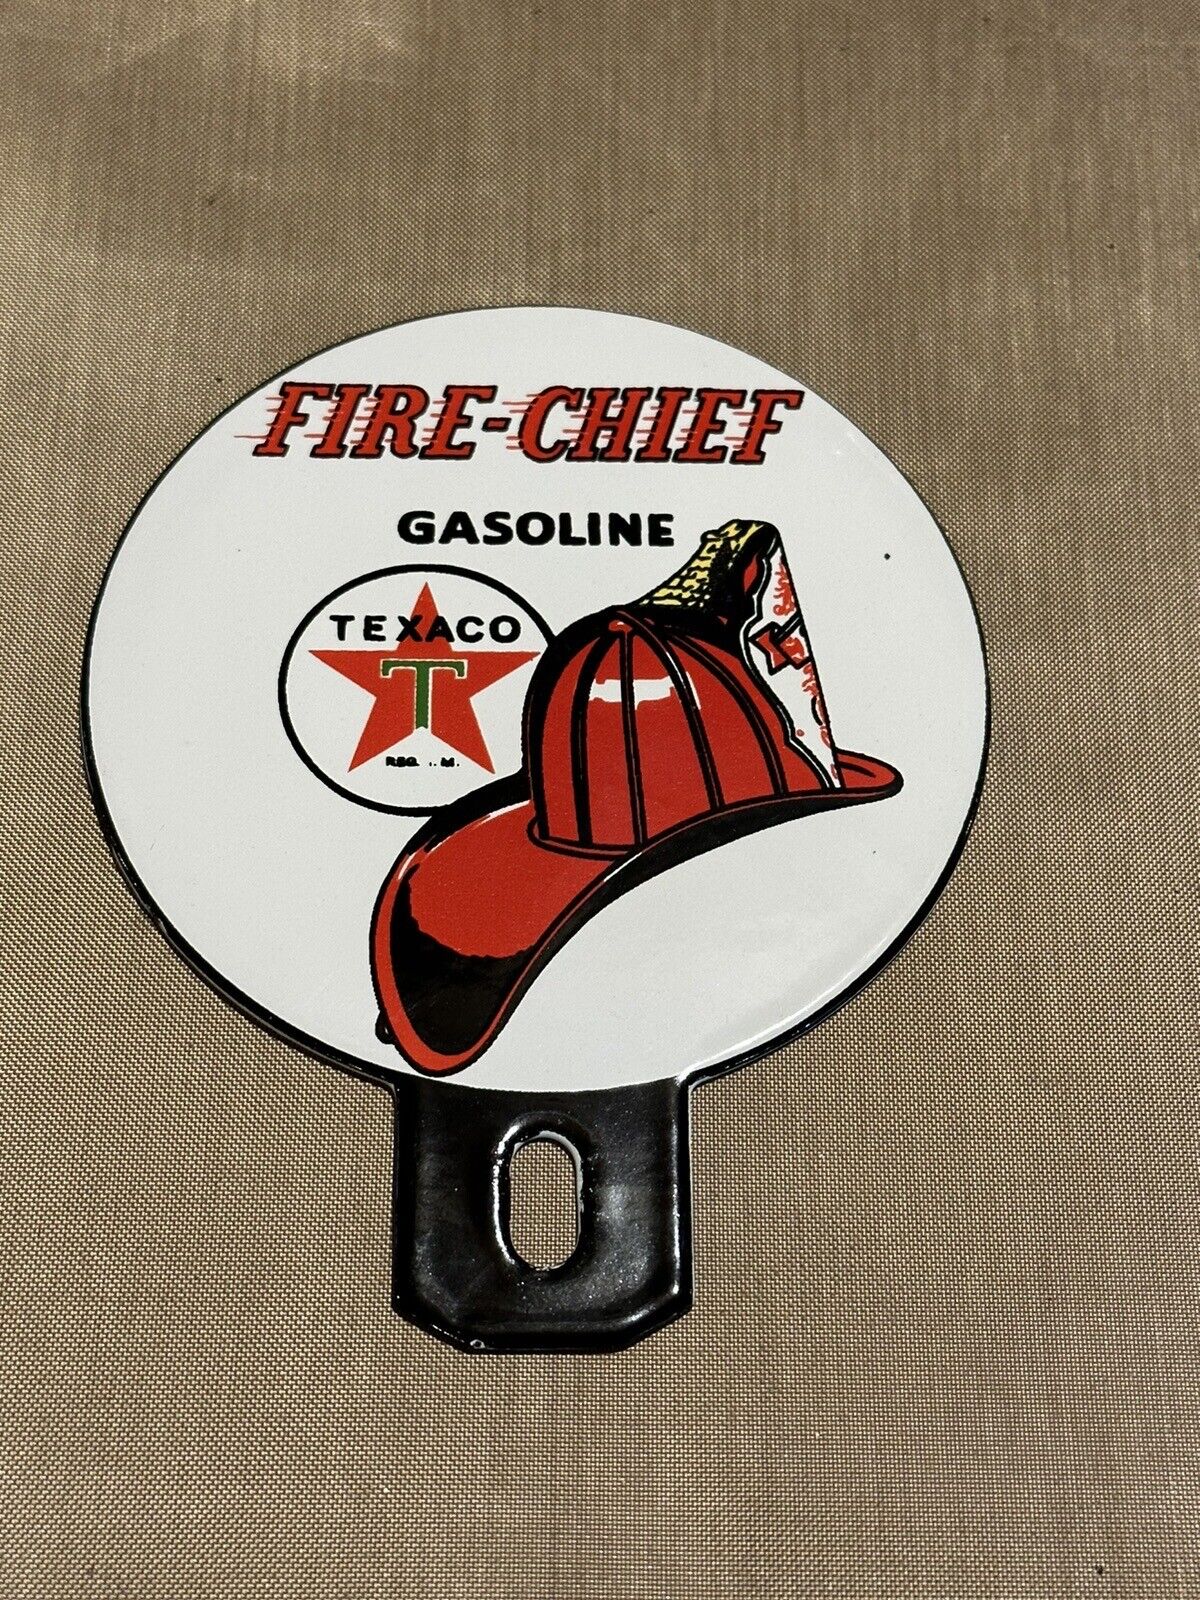 Vintage Style Small 5 Inch Texaco Fire Chief Topper  Advertising Porcelain  Sign